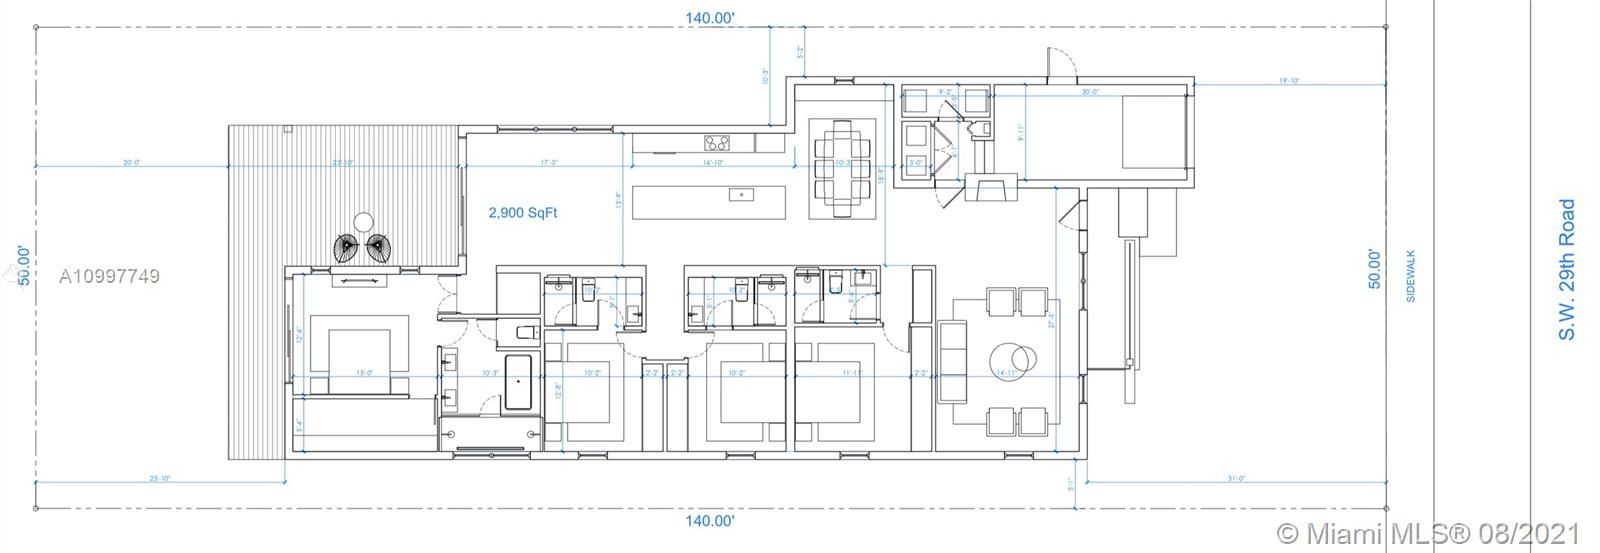 270 SW 29th Rd - Floor Plan with Measurements